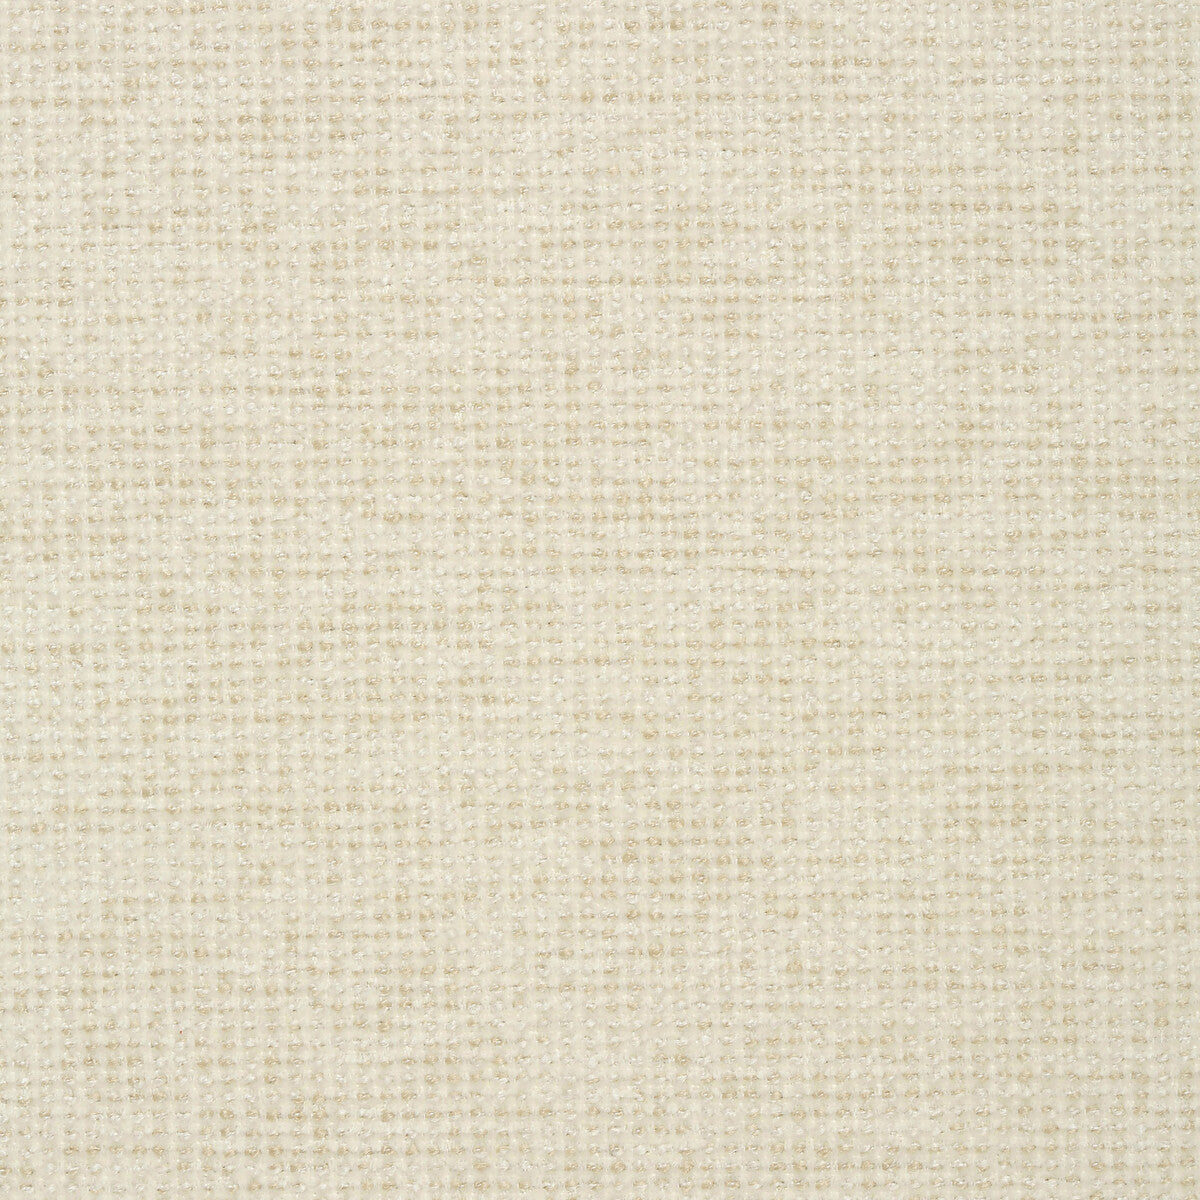 Kravet Contract fabric in 35116-111 color - pattern 35116.111.0 - by Kravet Contract in the Crypton Incase collection